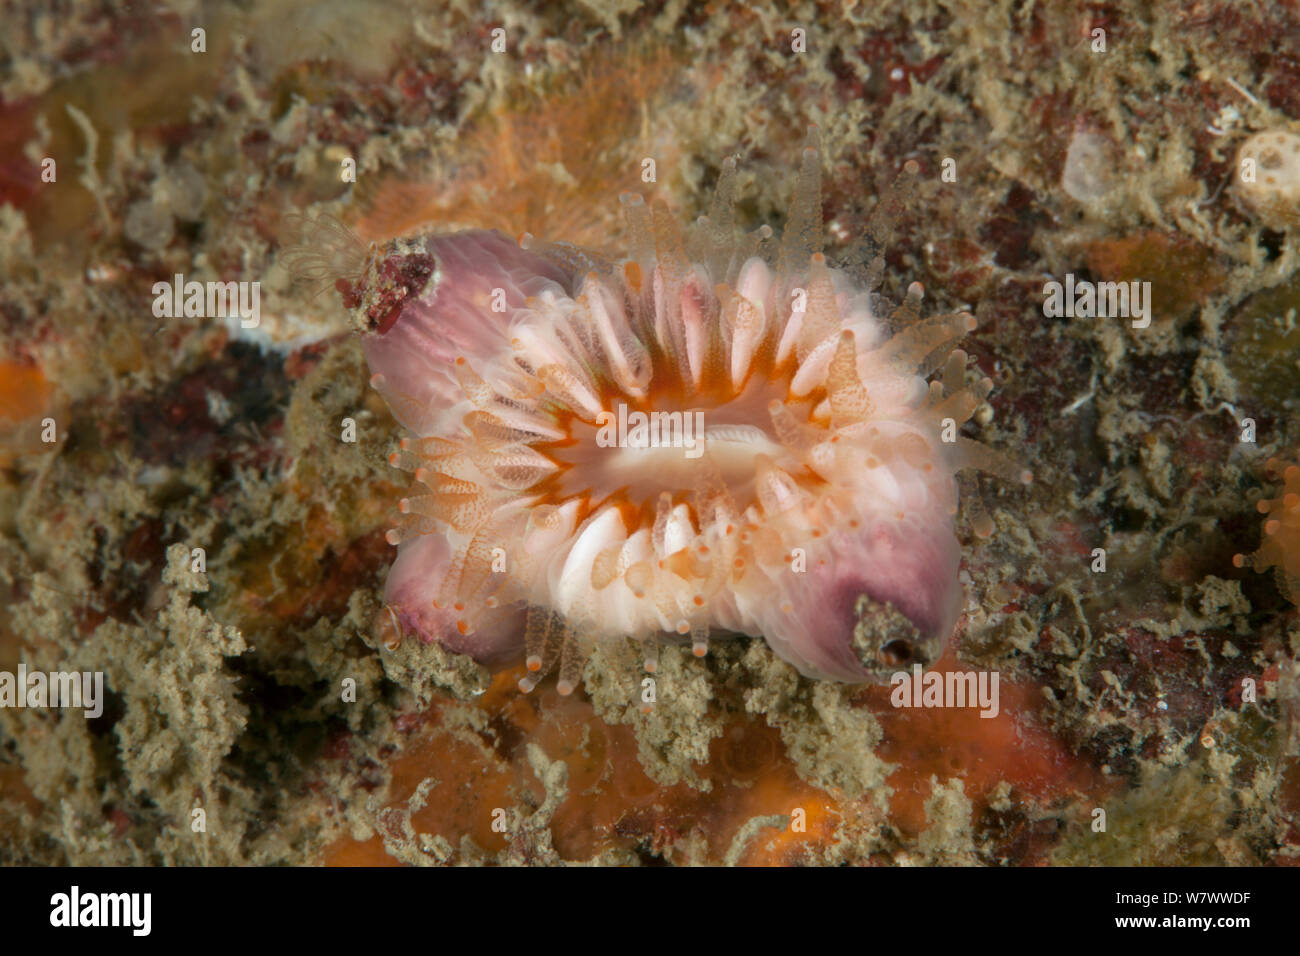 Devonshire cup coral (Caryophyllia smithii) with parasitic barnacle (Megatrema anglicum) Guillaumesse, Sark, British Channel Islands. Stock Photo